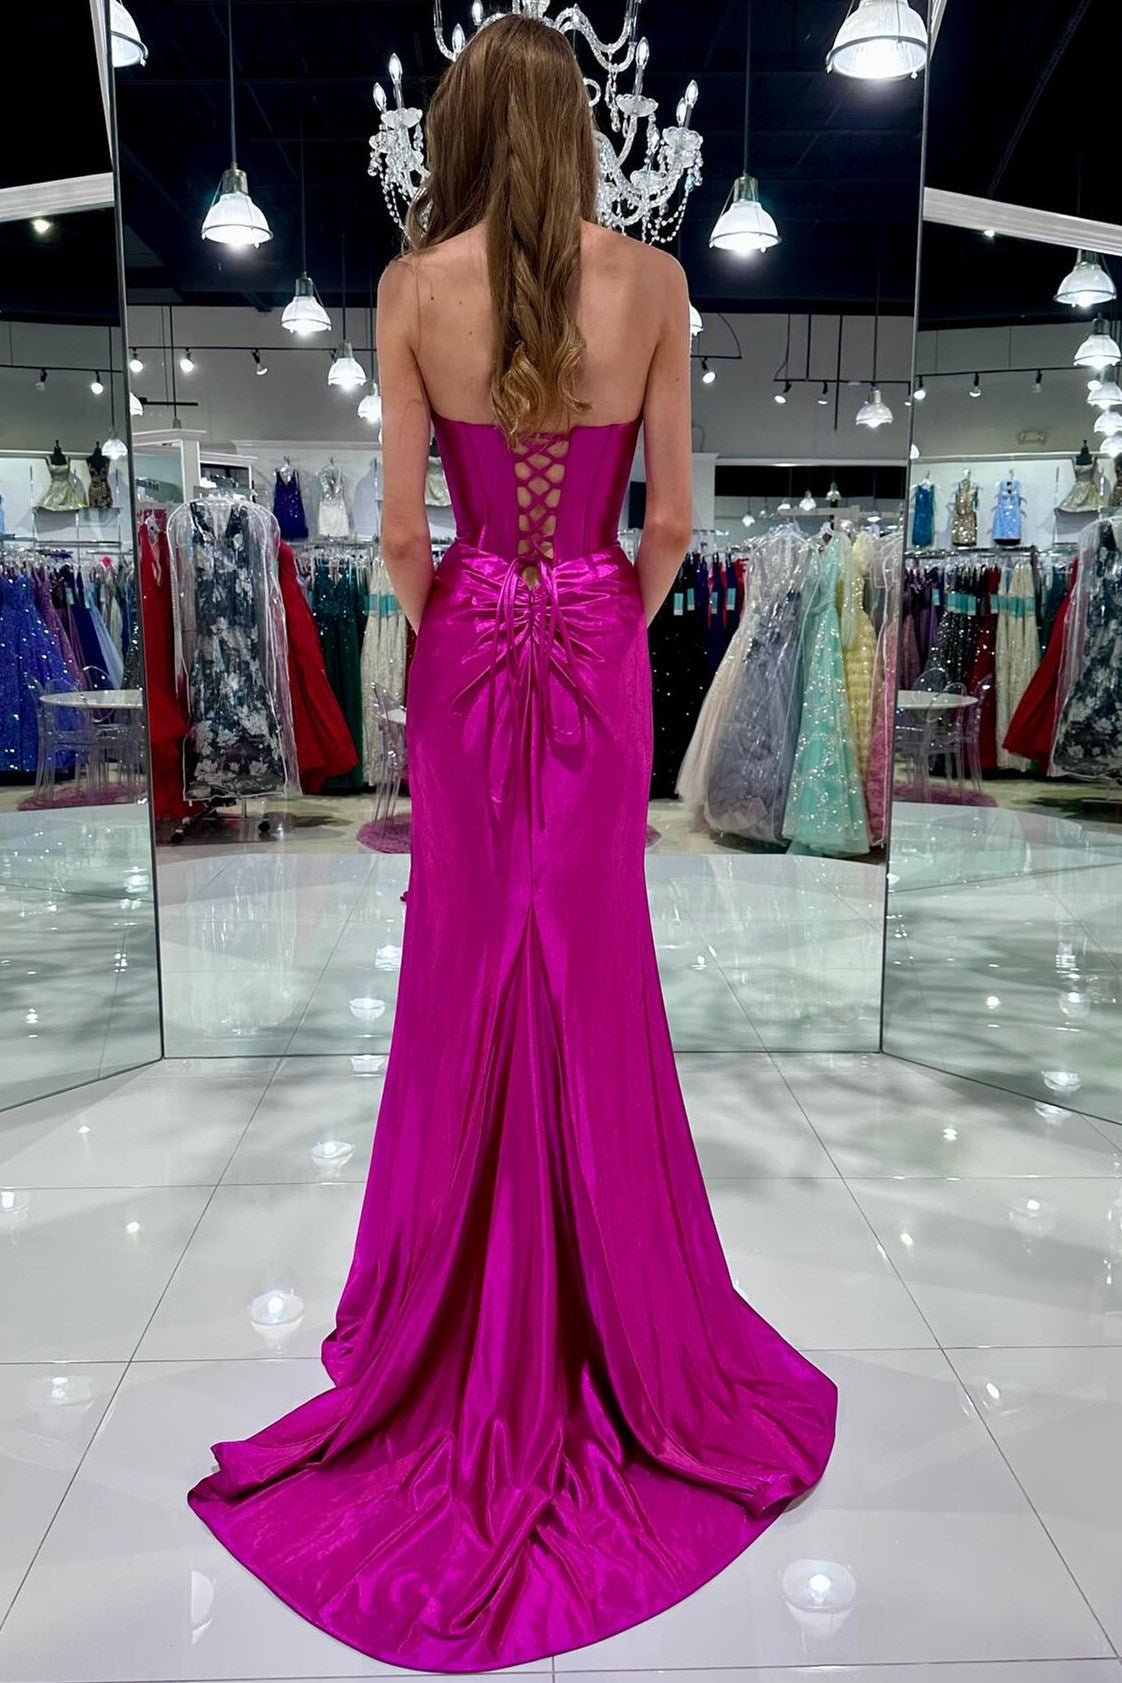 Leslie | Red Strapless Twist-Front Mermaid Long Dress with Slit